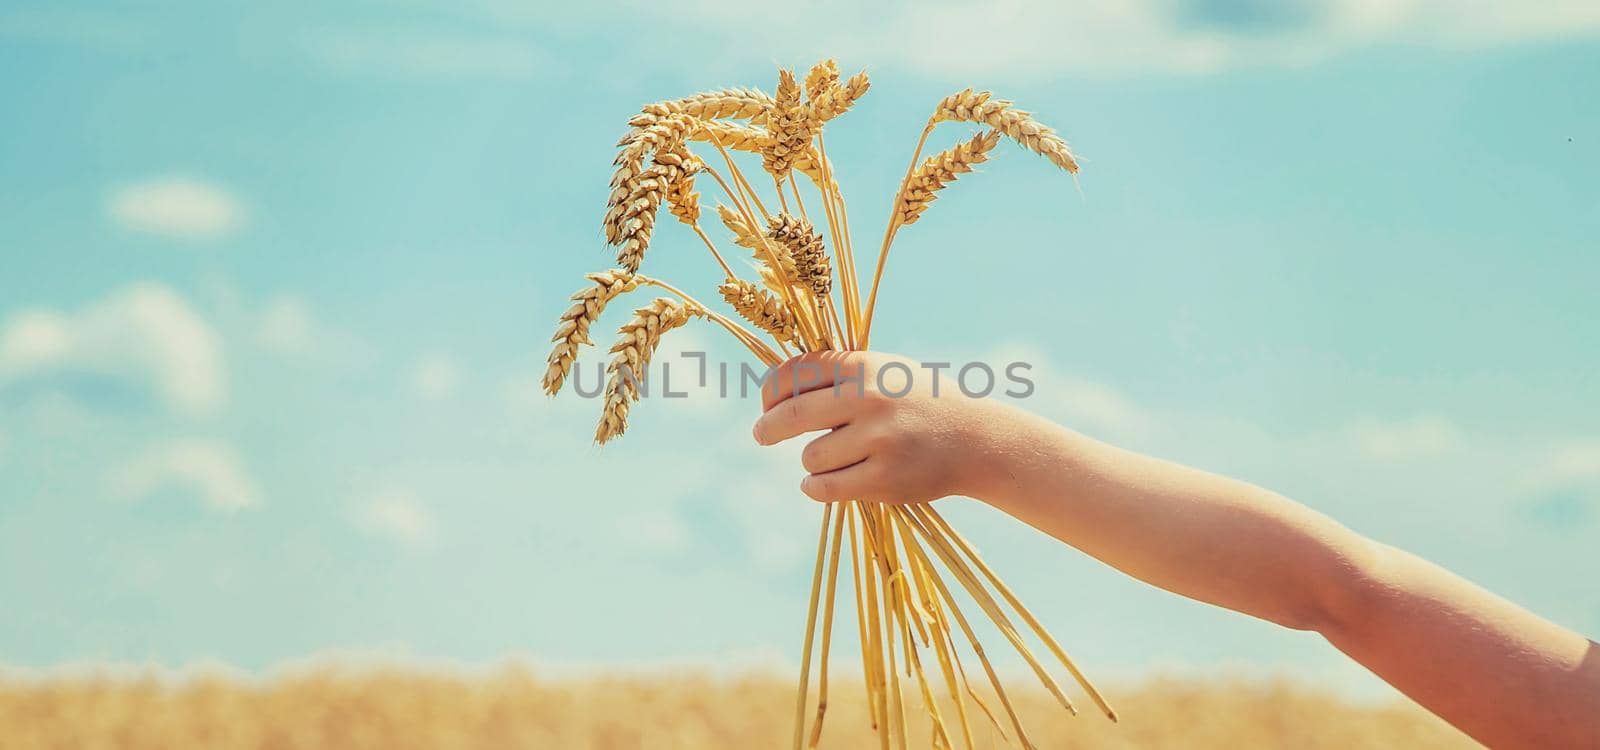 A child in a wheat field. Selective focus. nature.